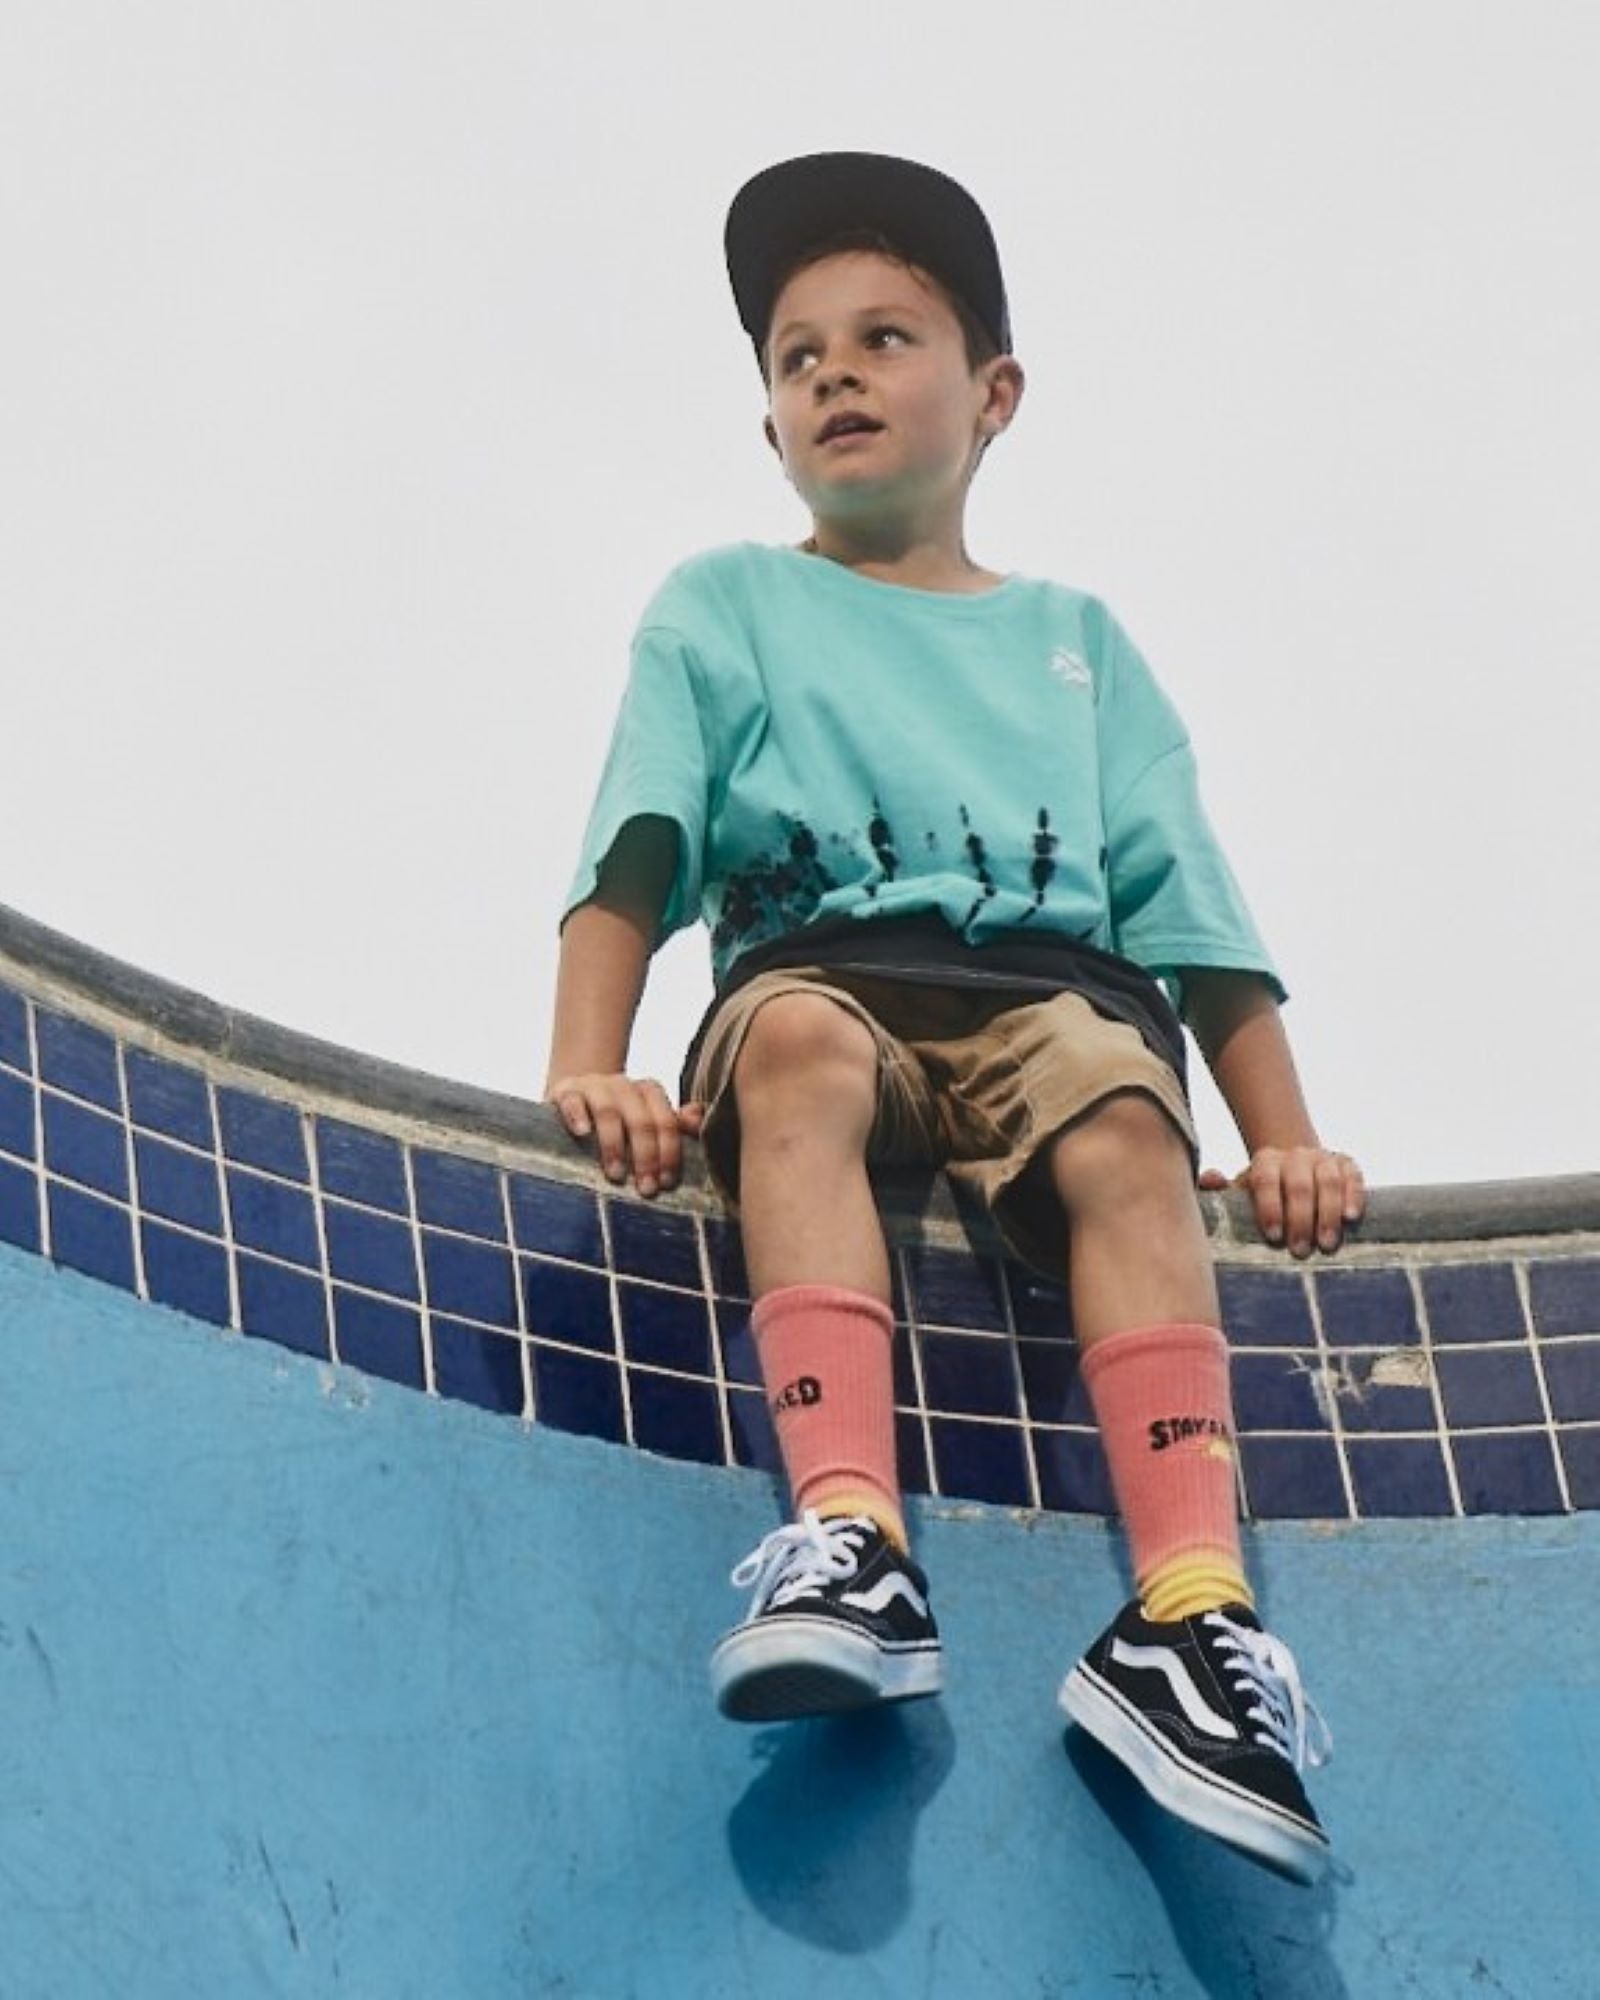 Alphabet Soup's Teen Frothy Tee for boys aged 8-16. Featuring cotton jersey, boxy fit, short sleeves, ribbed crewneck, straight hemline, green tie-dye print, puff chest print.